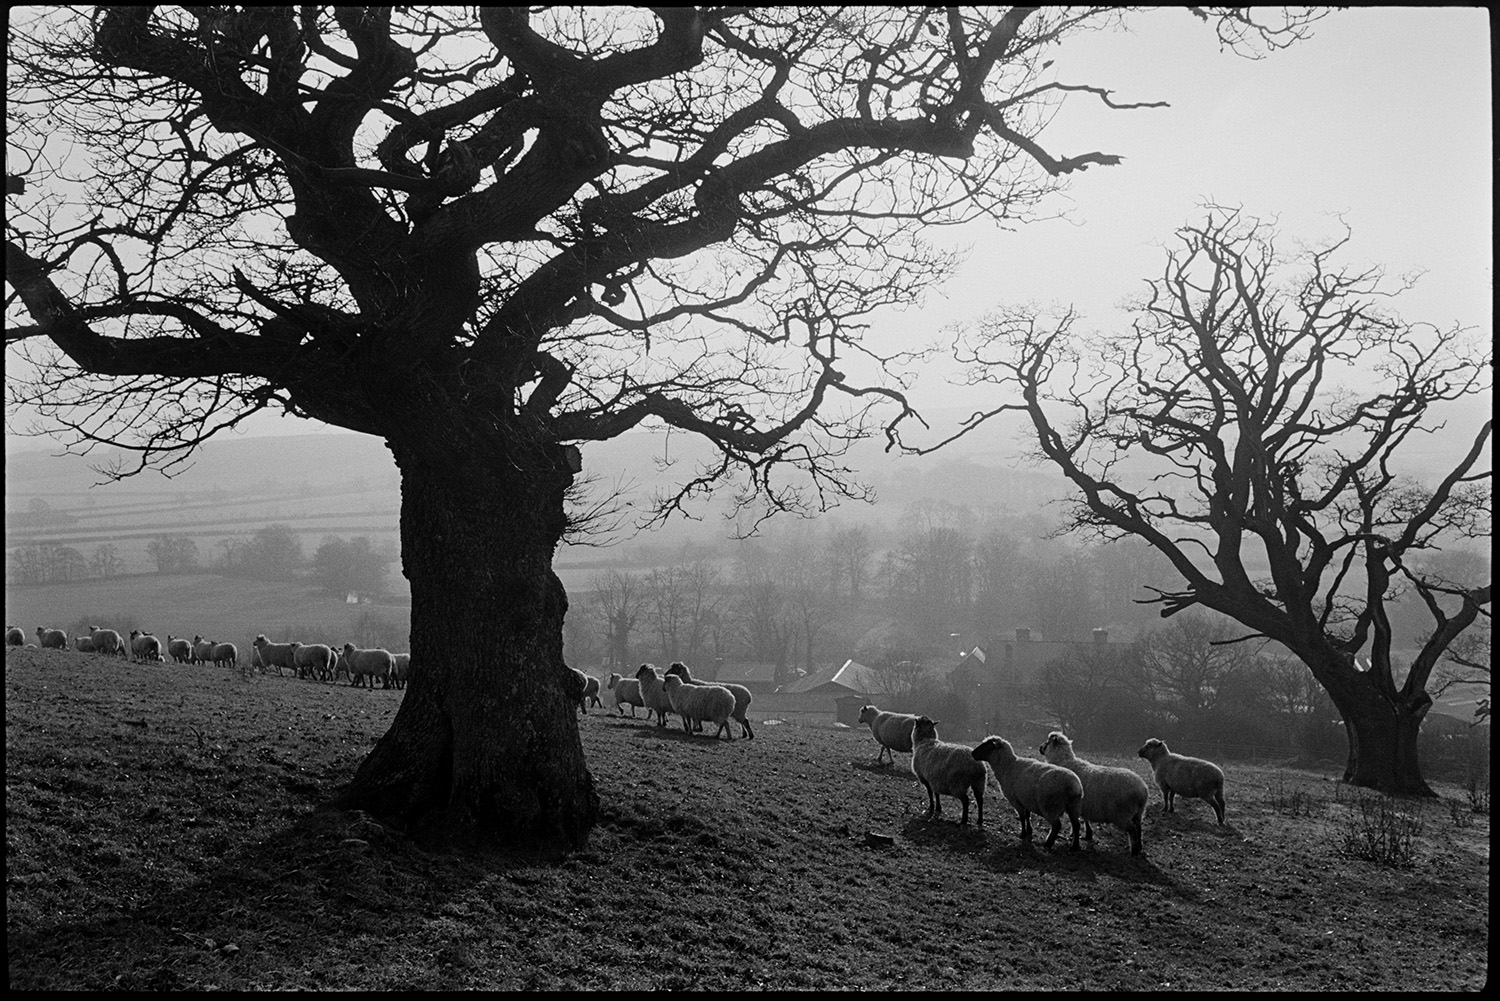 Large old oak in field with sheep, farmer feeding cattle, distant view with shepherd.
[A flock of sheep in a field with two large oak trees at Brushford Barton. Farm buildings are visible with a misty landscape of trees and fields in the background.]